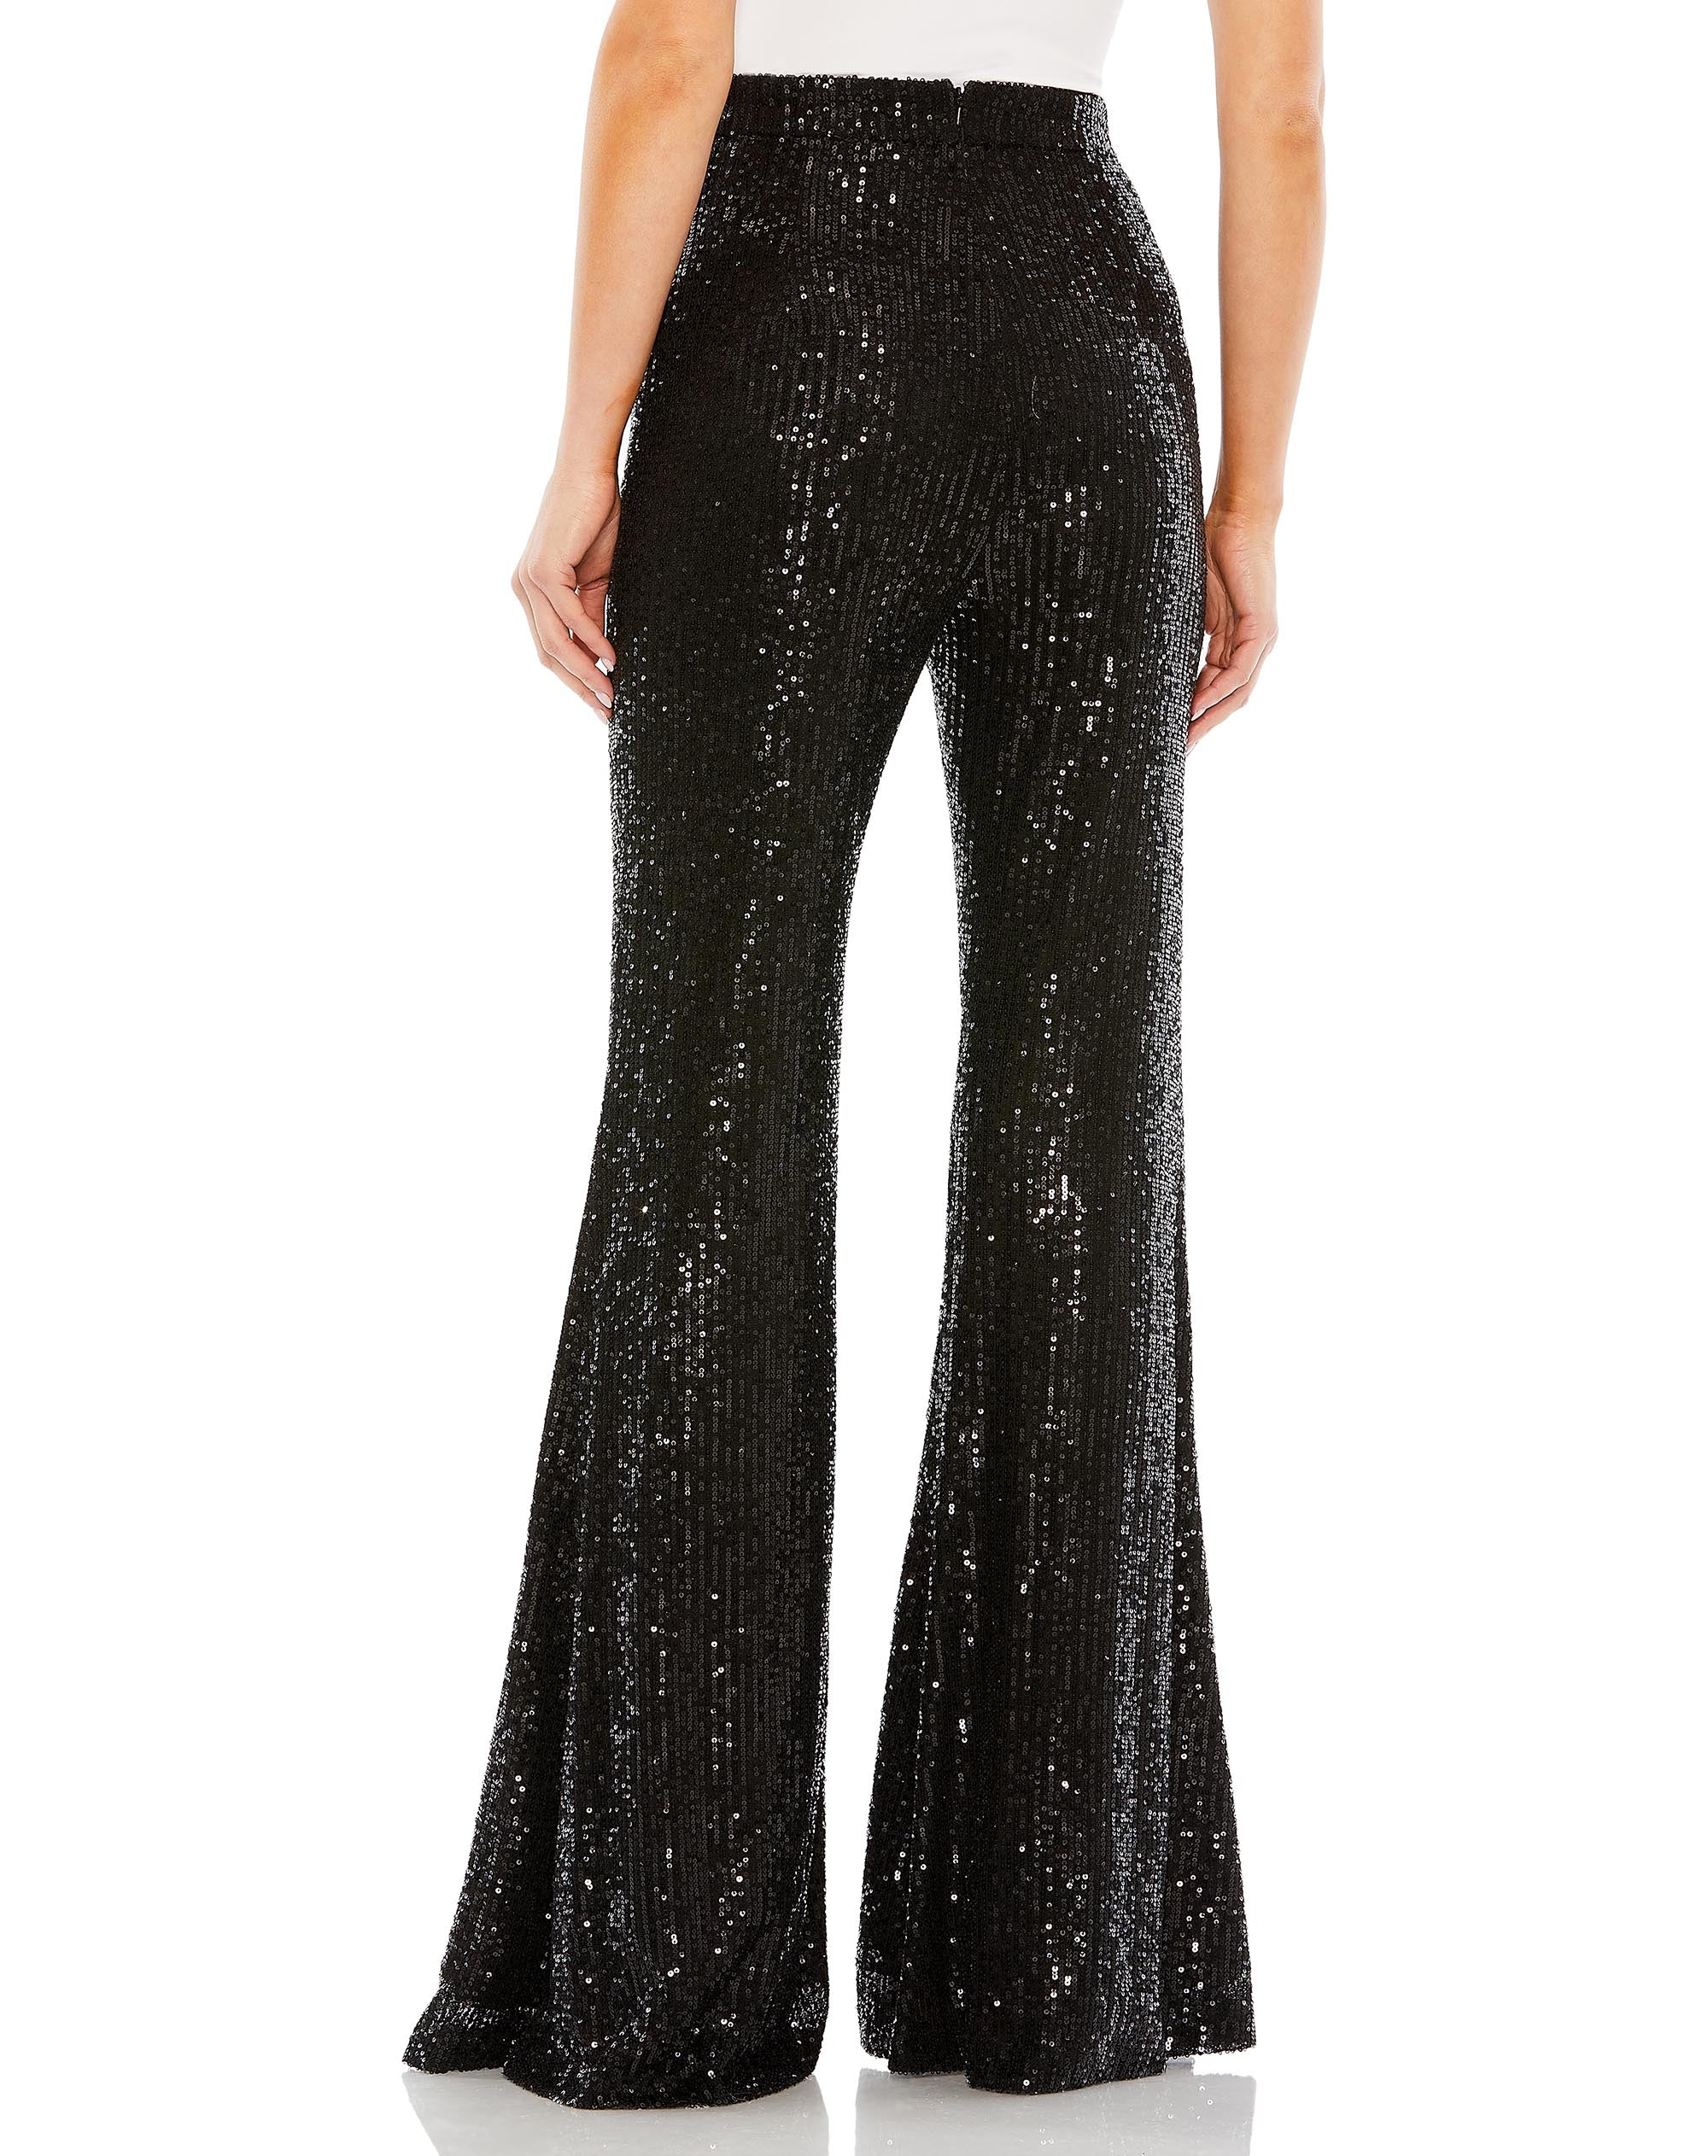 Sequin Flare Evening Pants